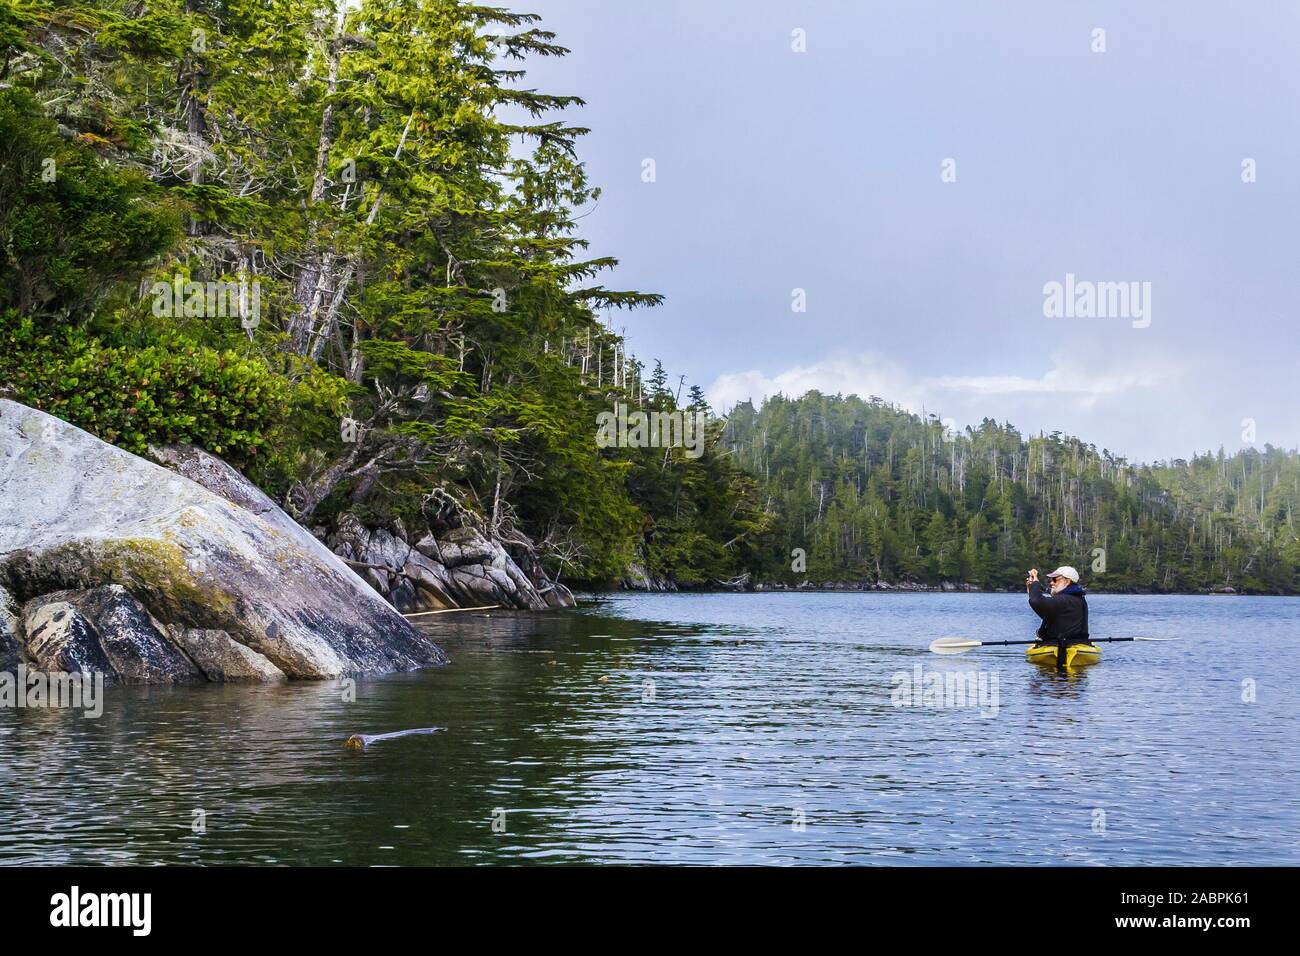 A lone middle-aged man floats in a kayak, holding up a camera to photograph a rocky, forested shoreline in a remote area of coastal British Columbia. Stock Photo